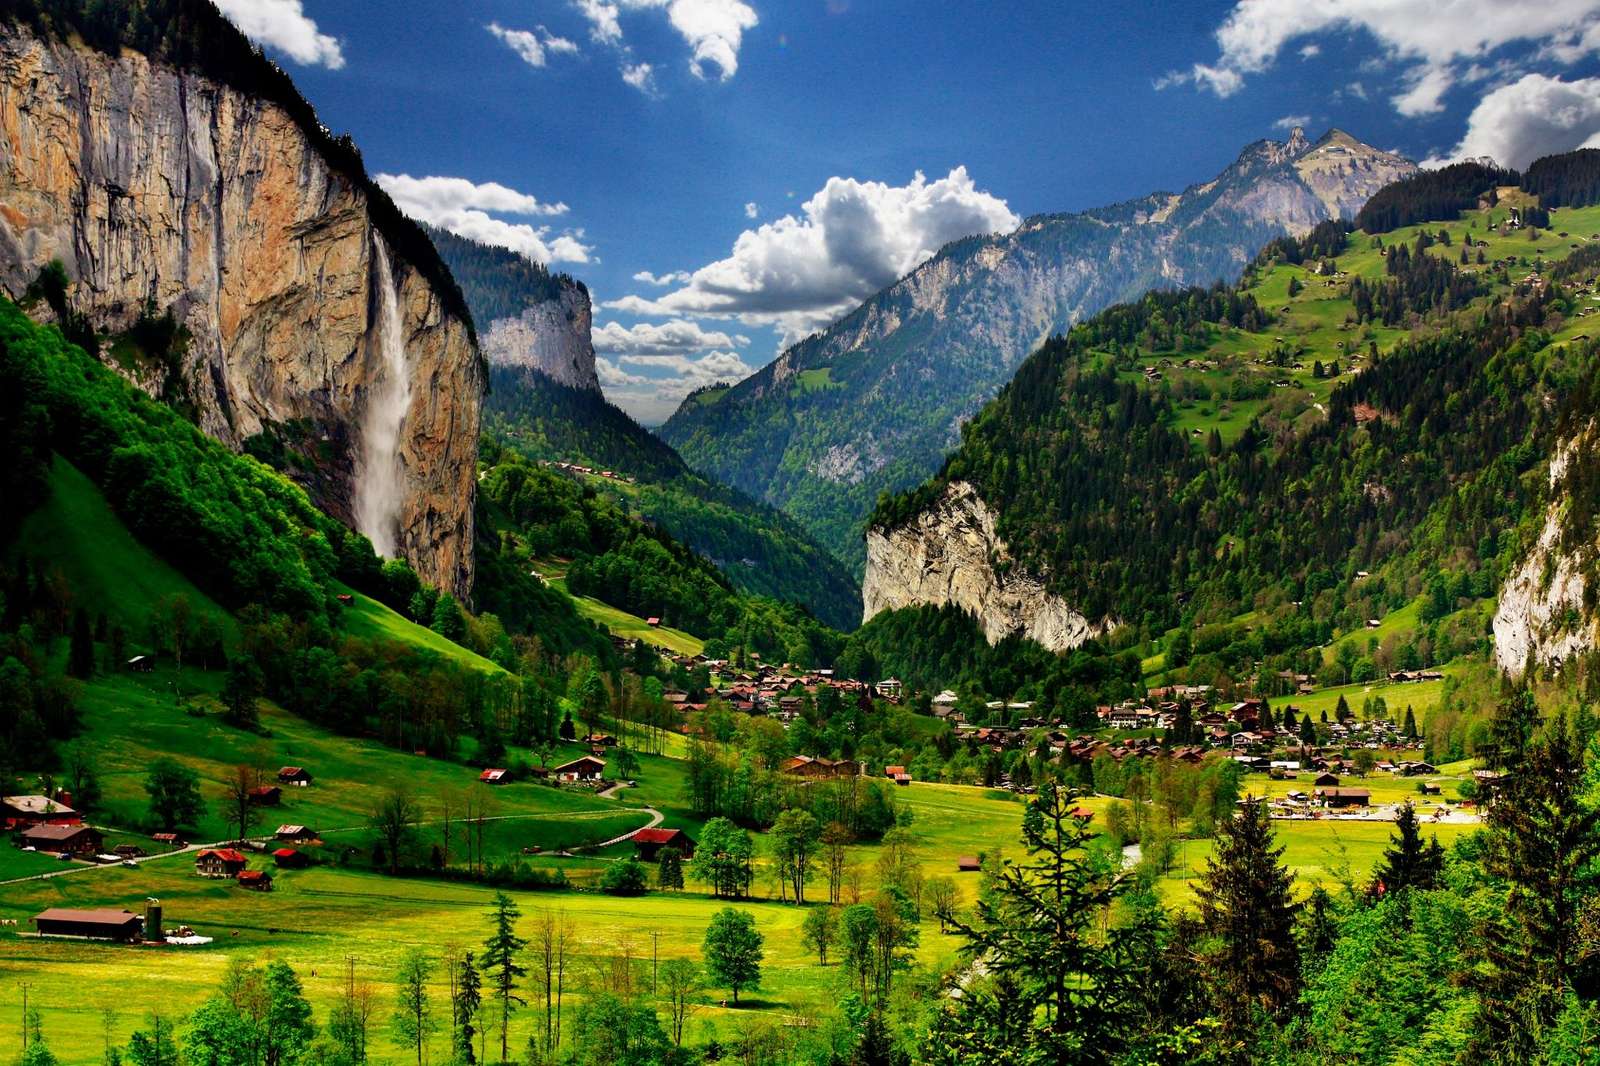 Hills and Valleys' Switzerland puzzle online from photo